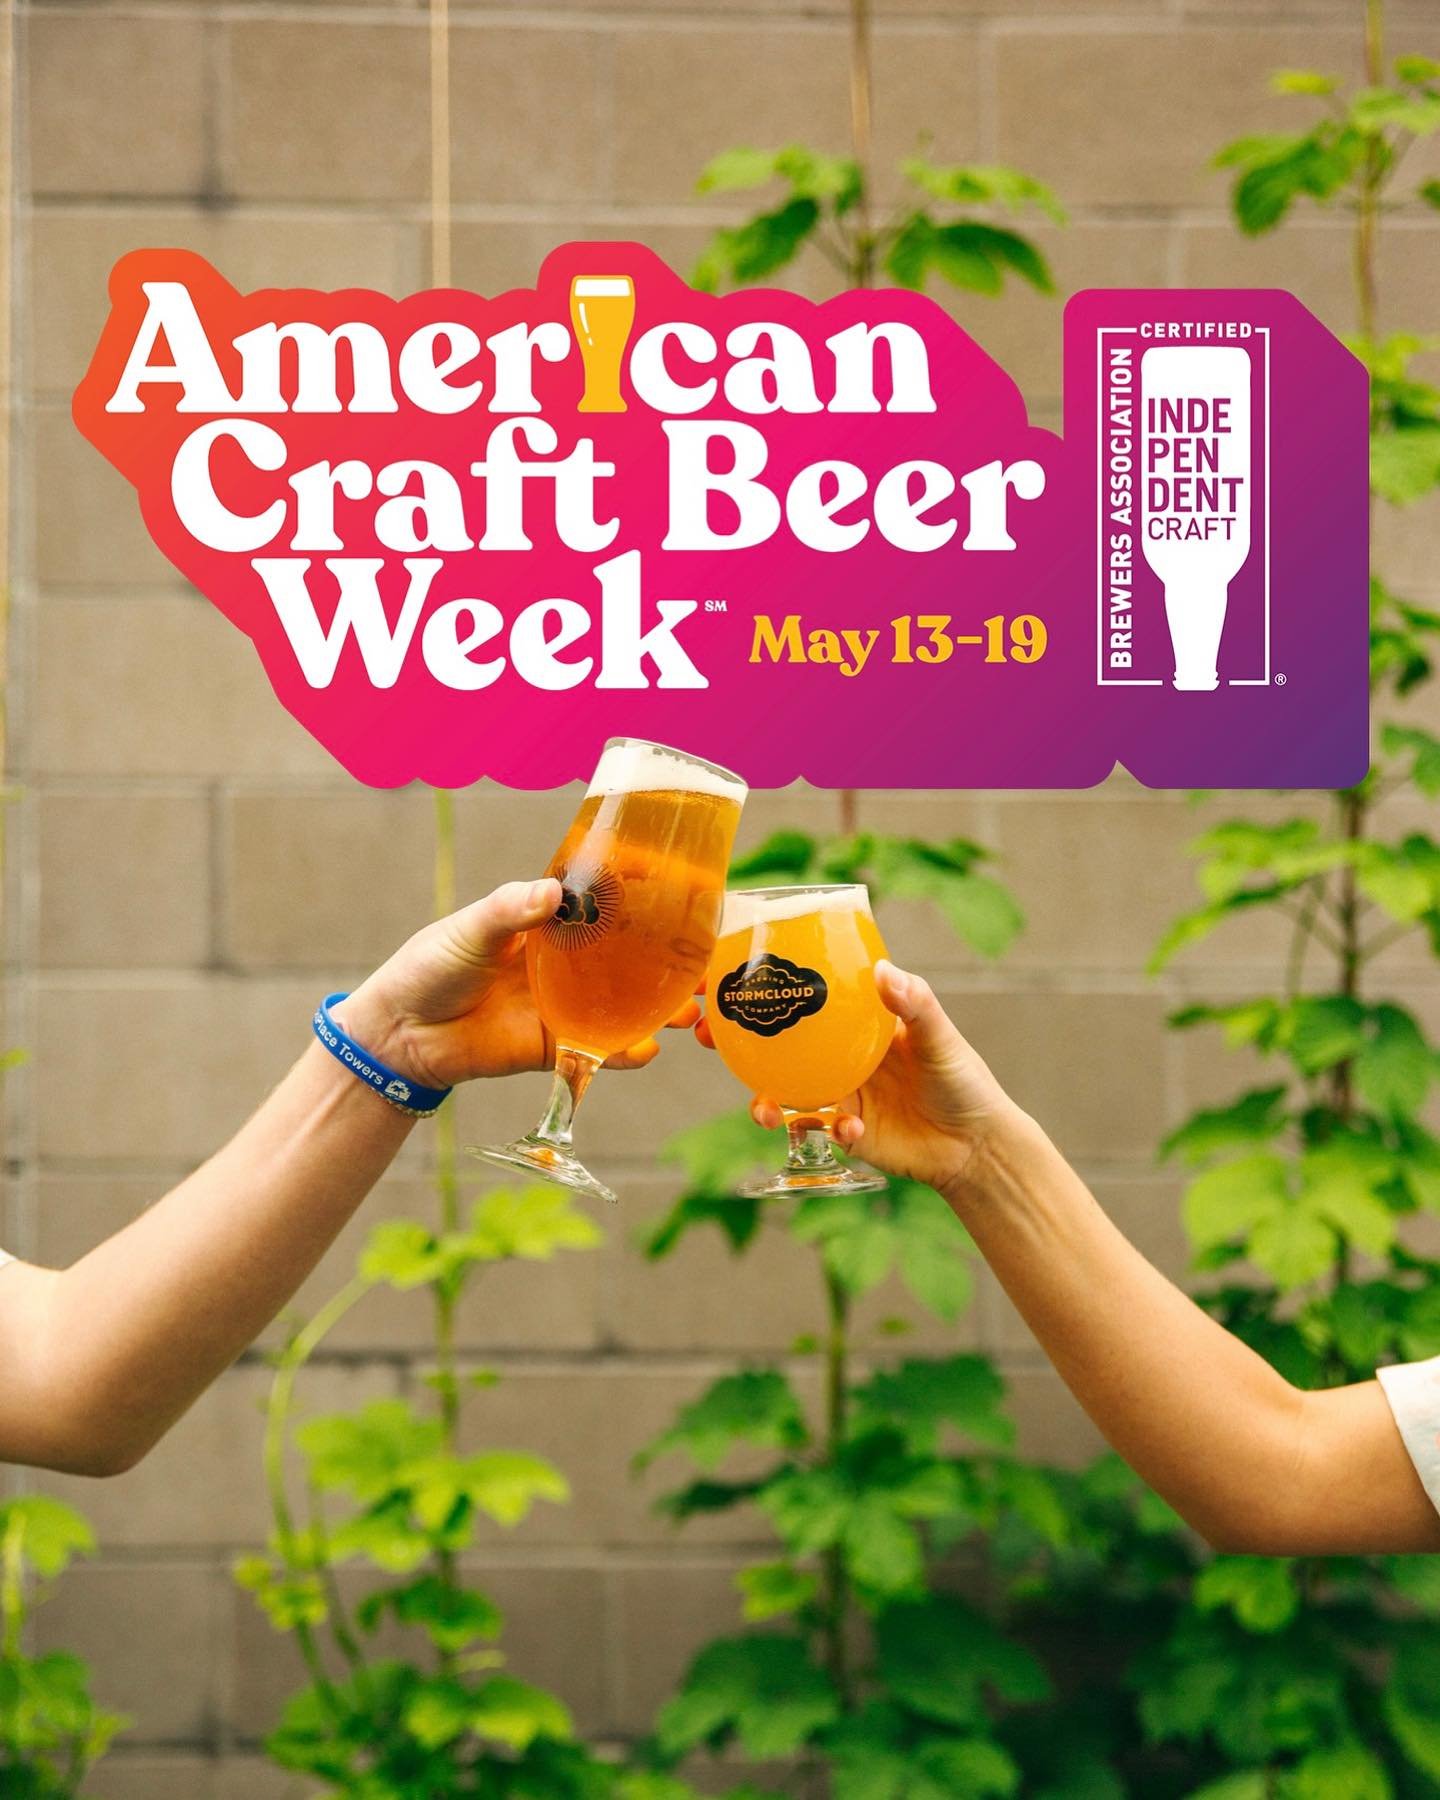 We are HUGE fans of supporting local, independent craft breweries and that&rsquo;s what American Craft Beer Week is all about! 

From May 13th through May 19th we will have:
- Daily $5 featured beer specials with suggested food pairings
- $7.50 fligh